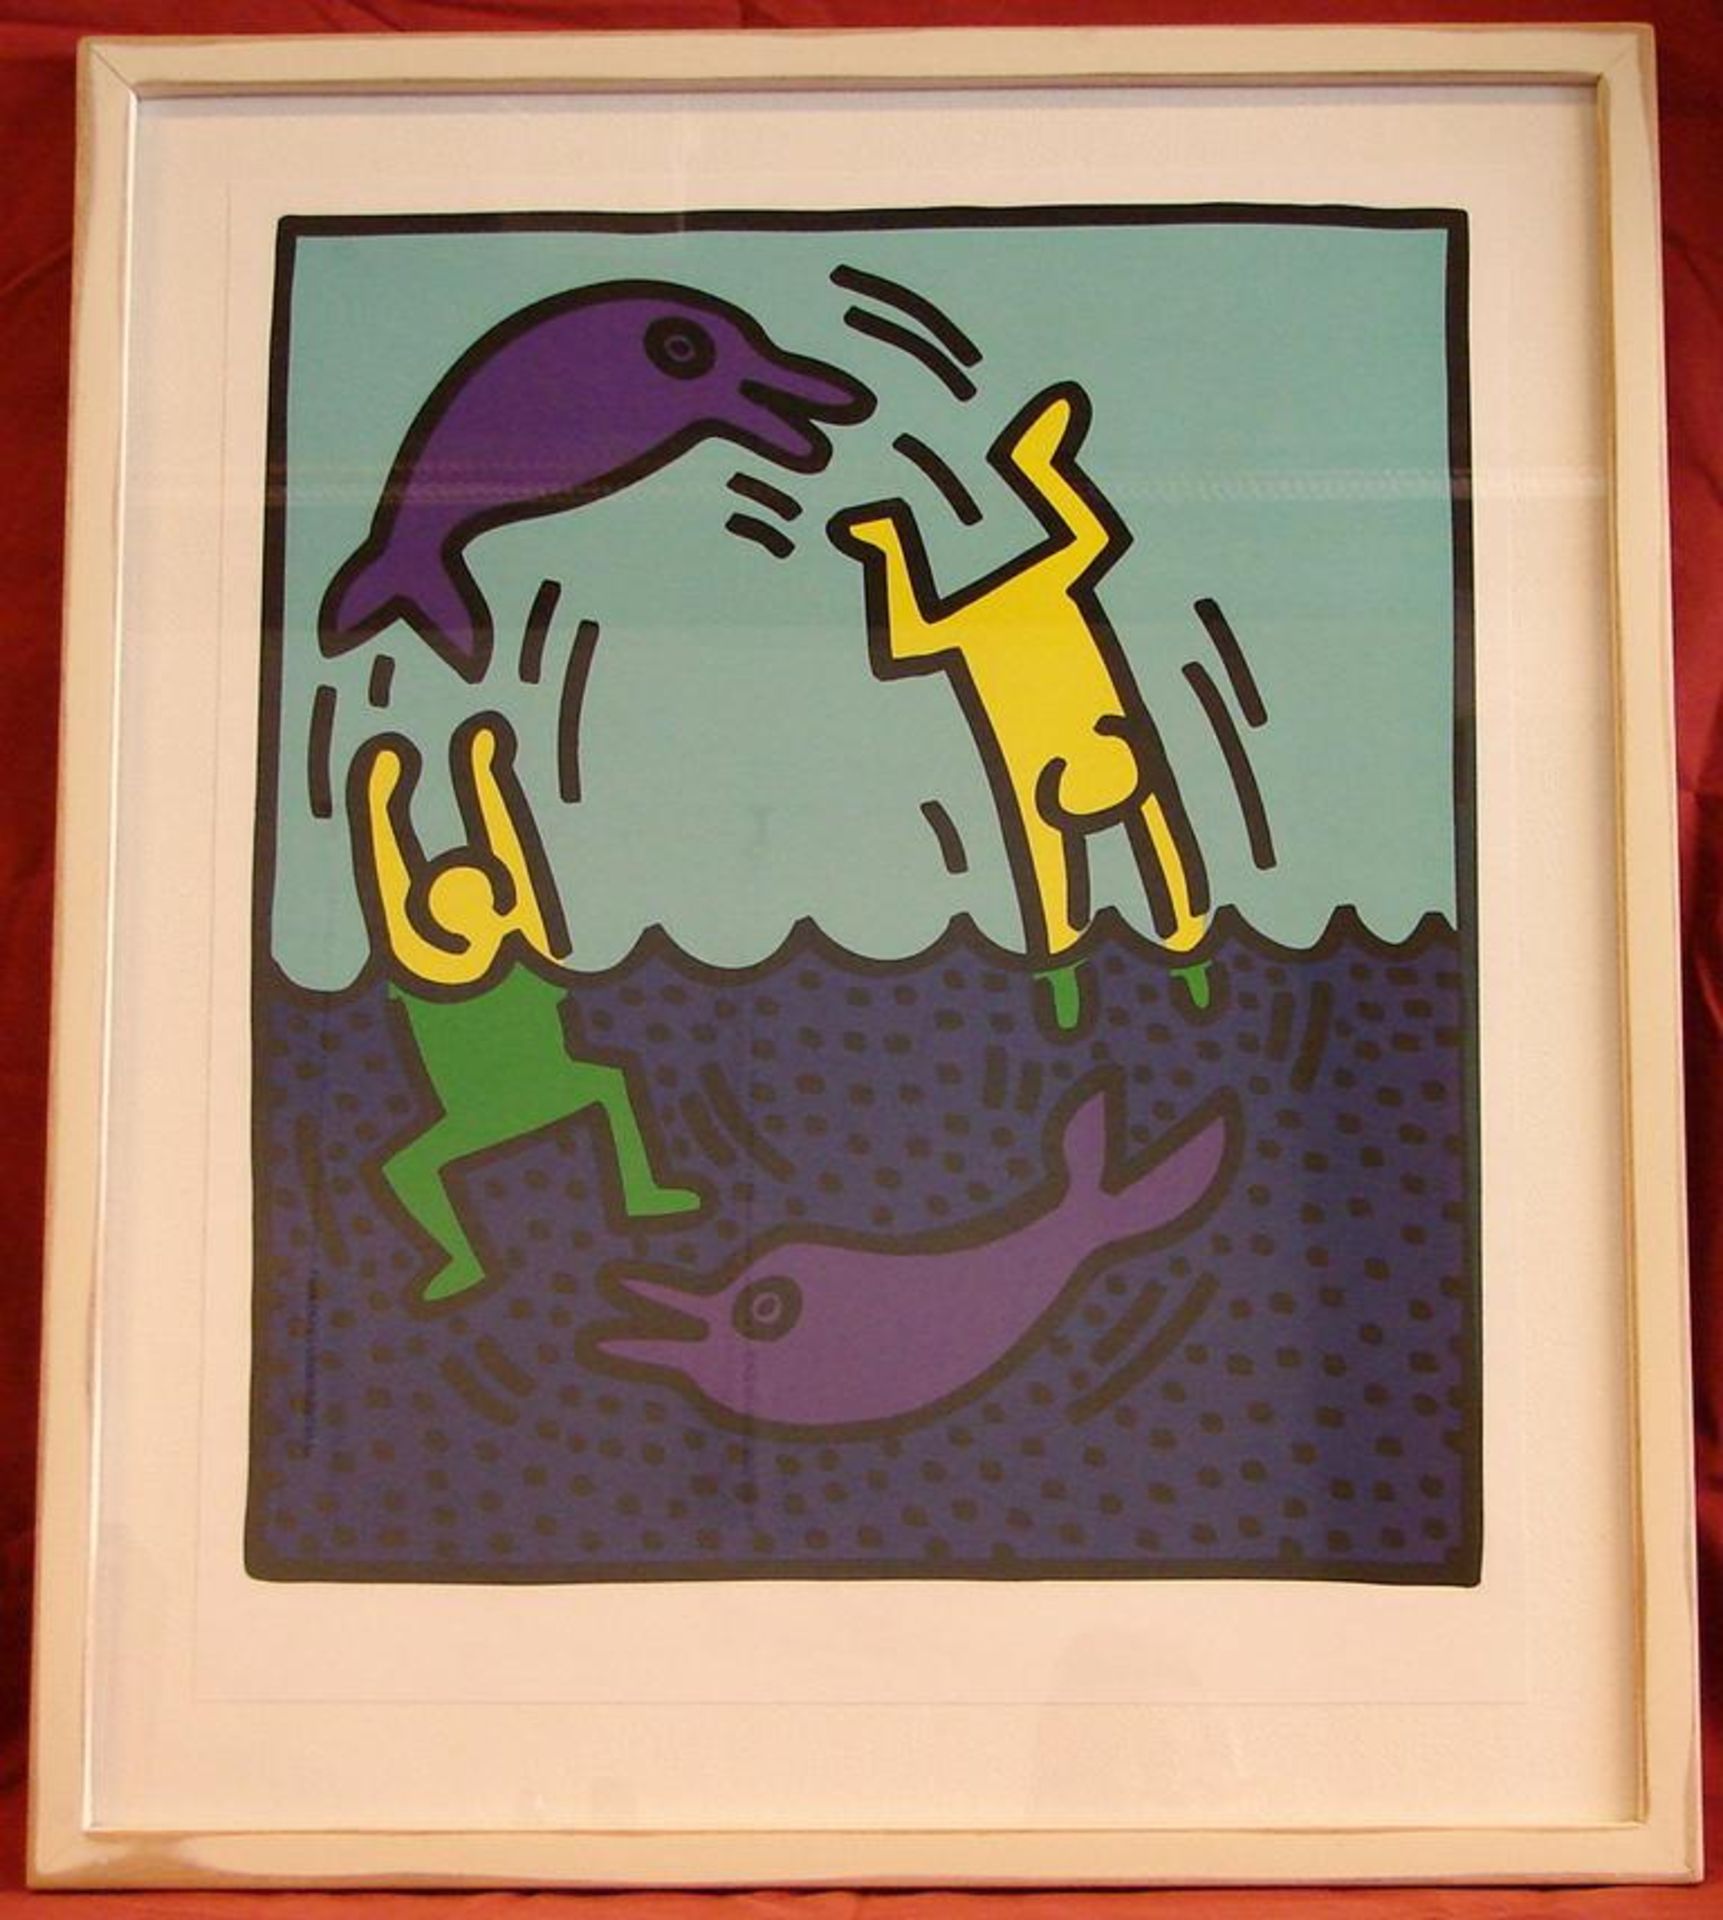 KEITH HARING 1958-1990), "Swimming with Dolphins", Farboffsetlithografie, Edition Te Neues von ...